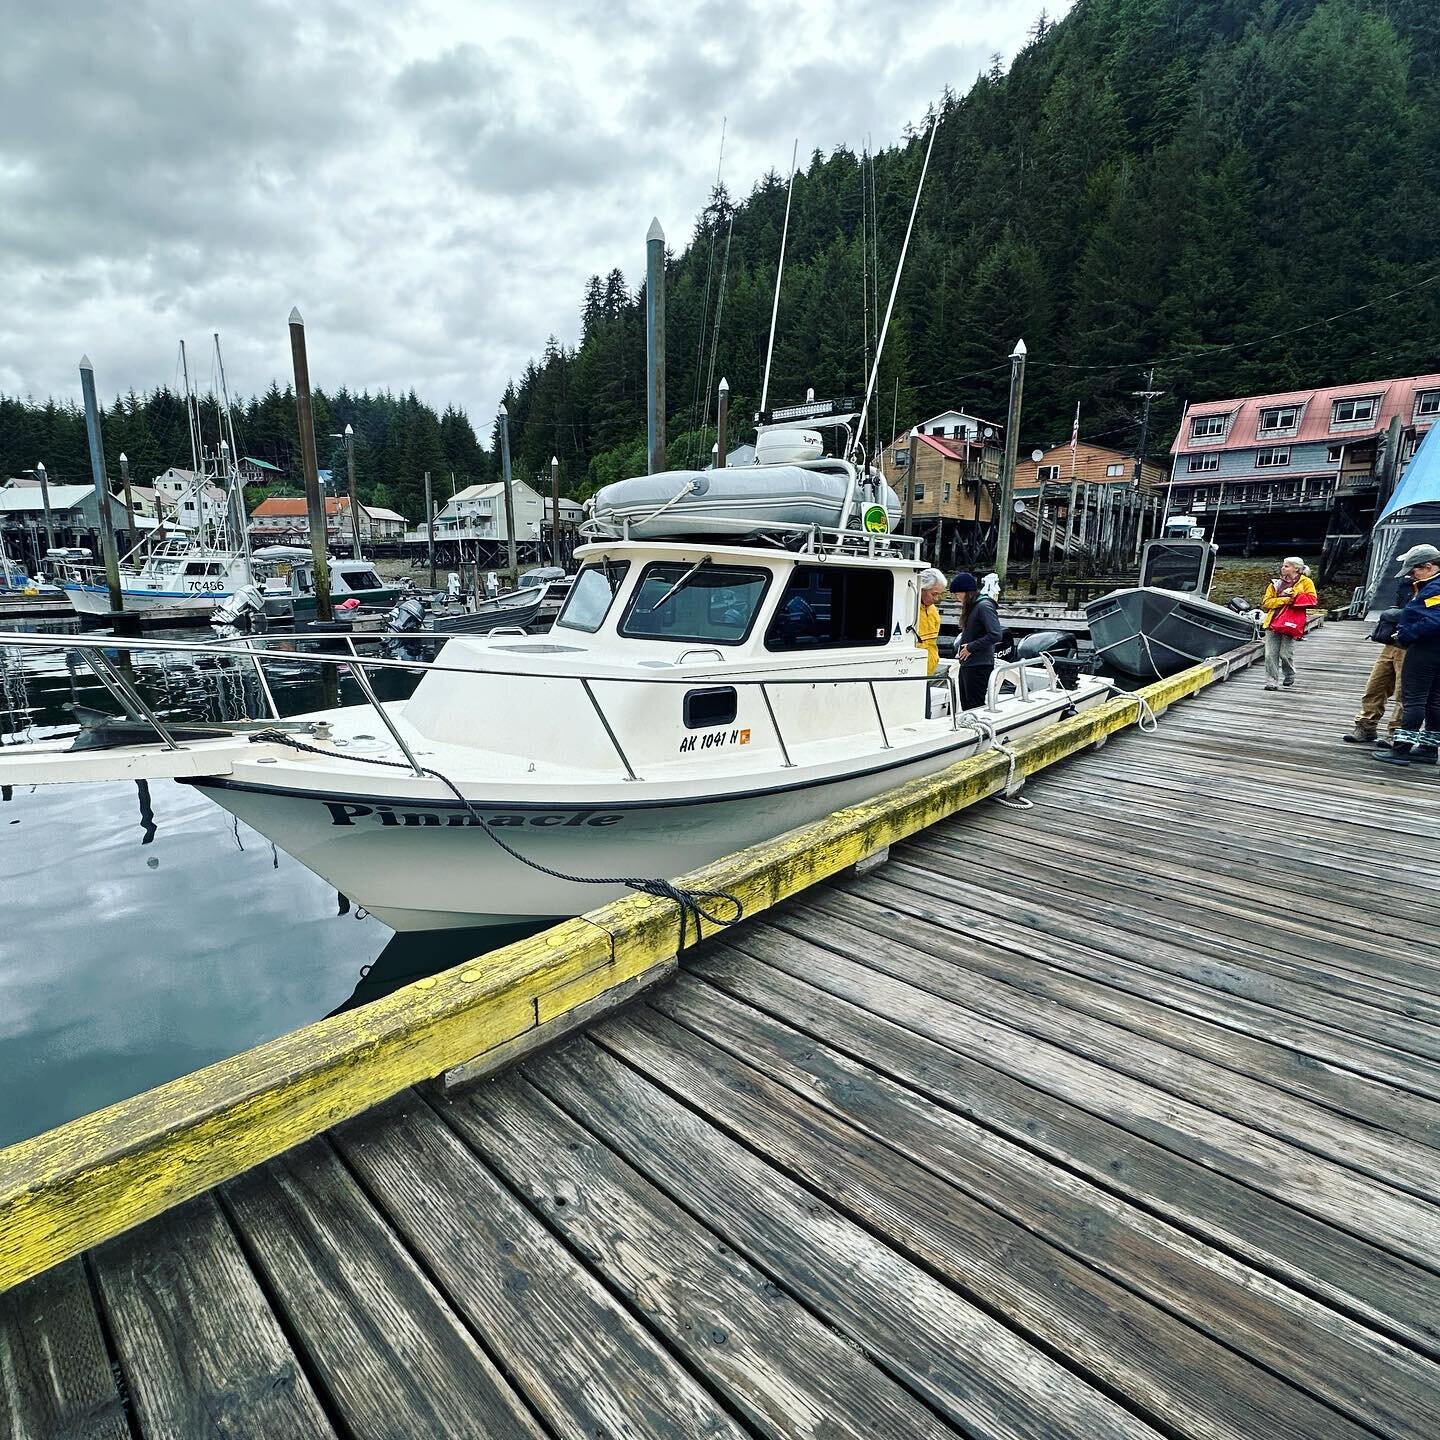 Did a quick trip to the town of Pelican which is about 80 nautical miles from Sitka.
Brought some @sitkawild folks  and their gear to the phonograph bay property that they maintain. 
#watertaxi #sitka #pelican #pelicanalaska #boating #alaska #sitka #